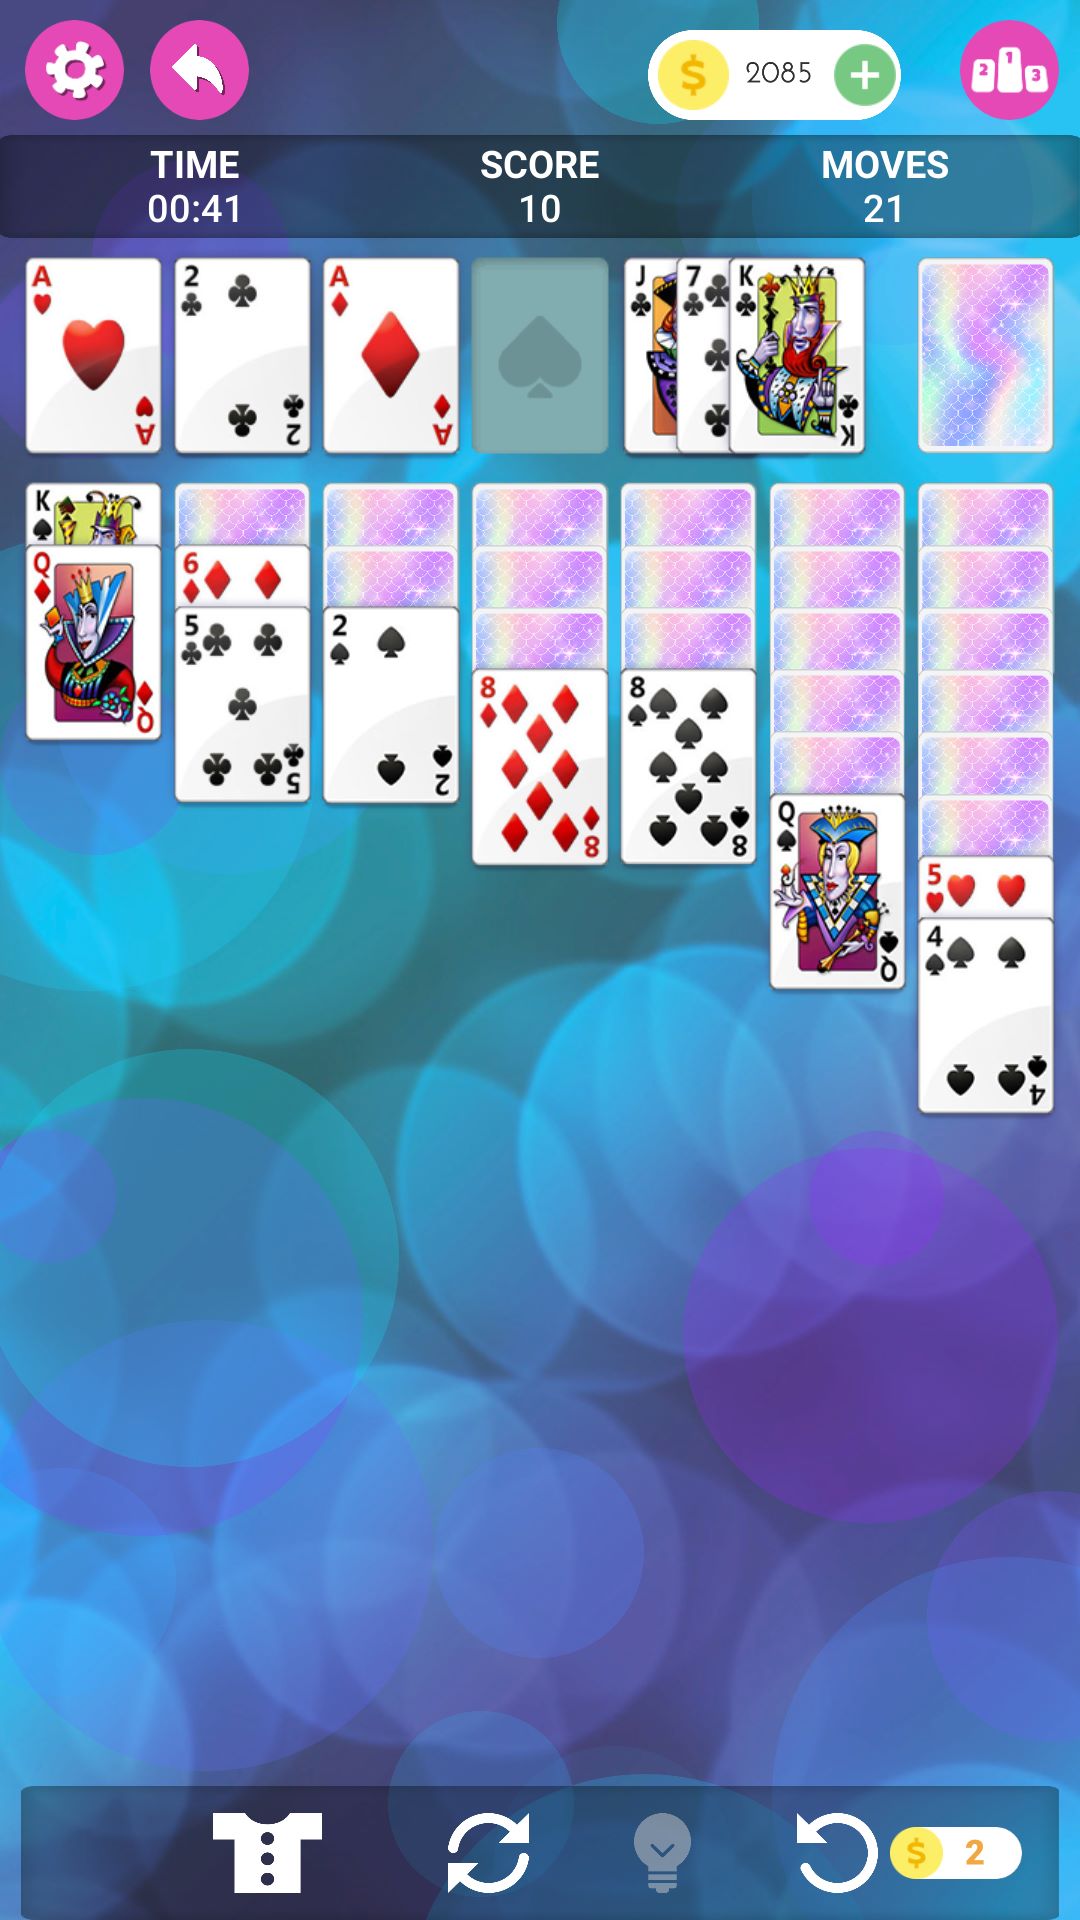 Solitaire Game Classic For Kindle Fire Tablet Easy Play Free